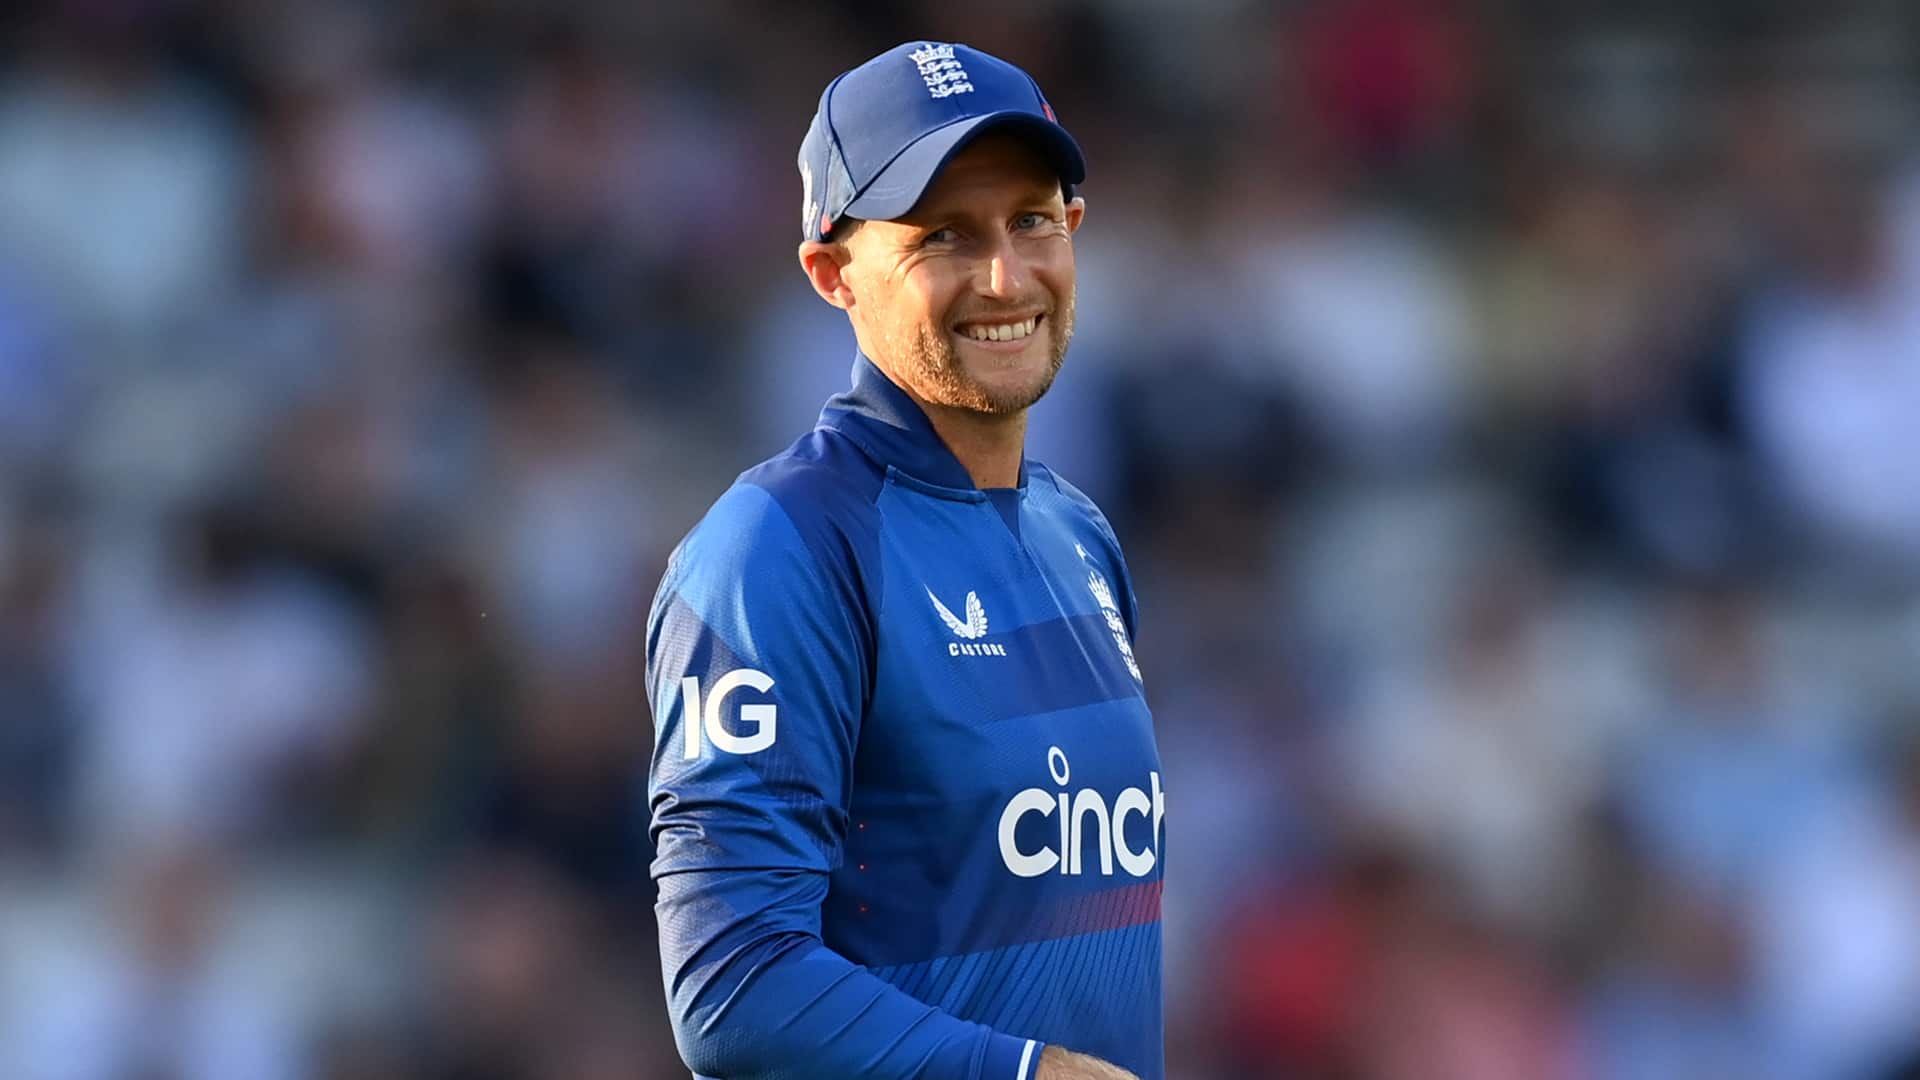 ICC World Cup: Joe Root scripts unique record against Afghanistan